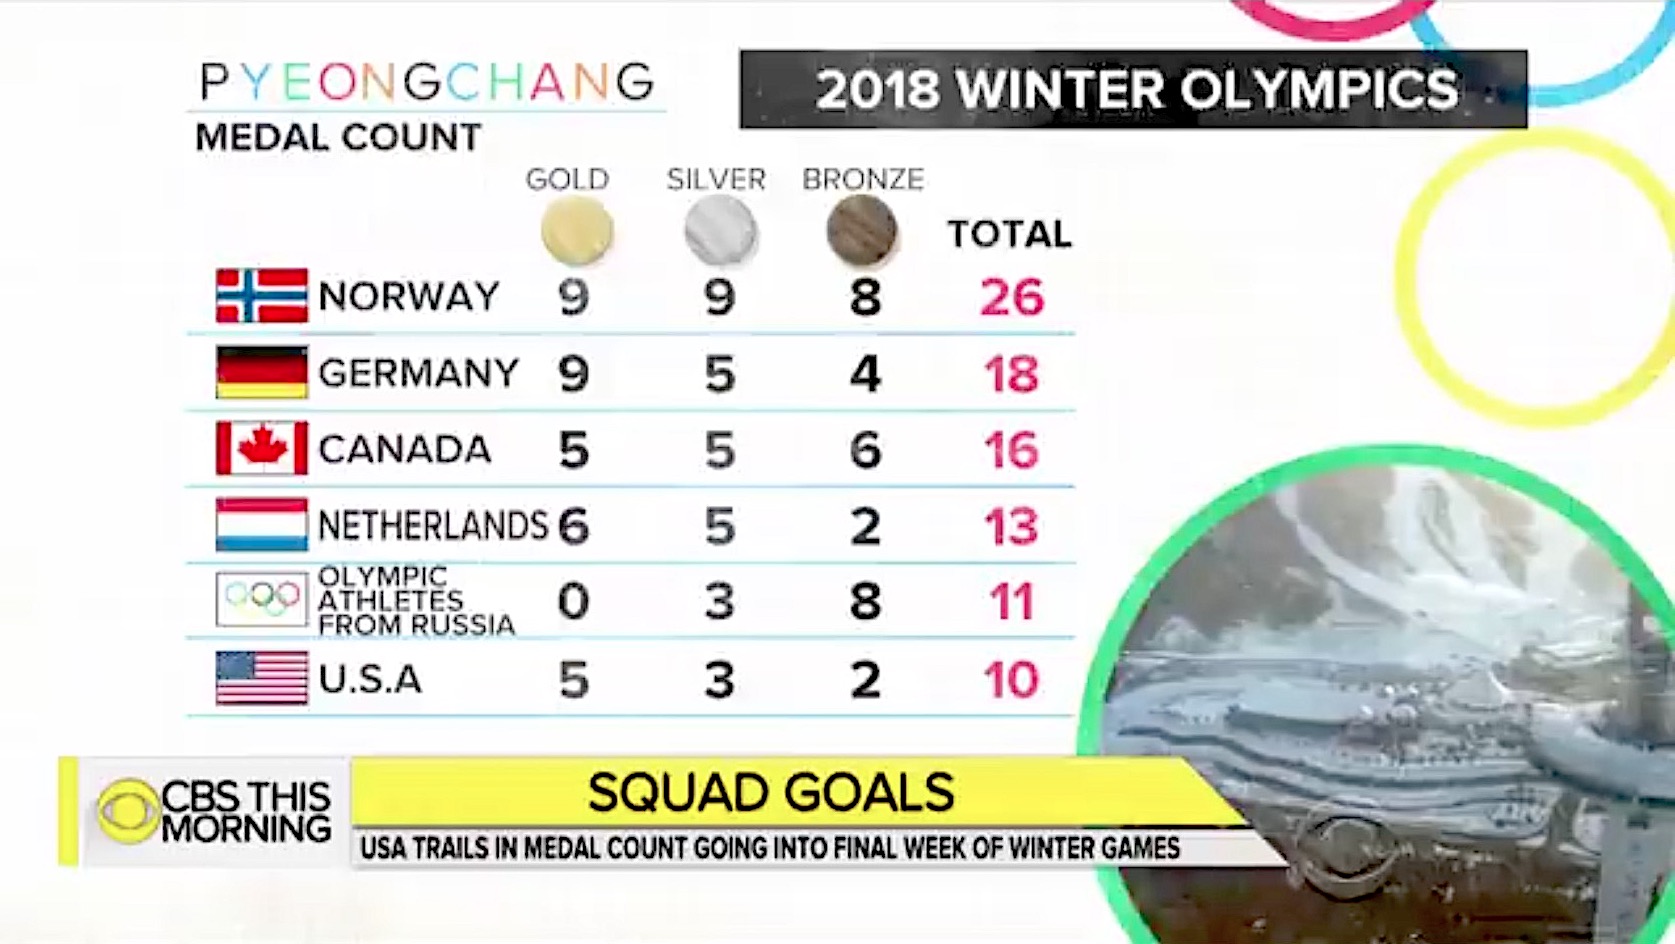 Team USA is faring poorly at the 2018 Winter Olympics